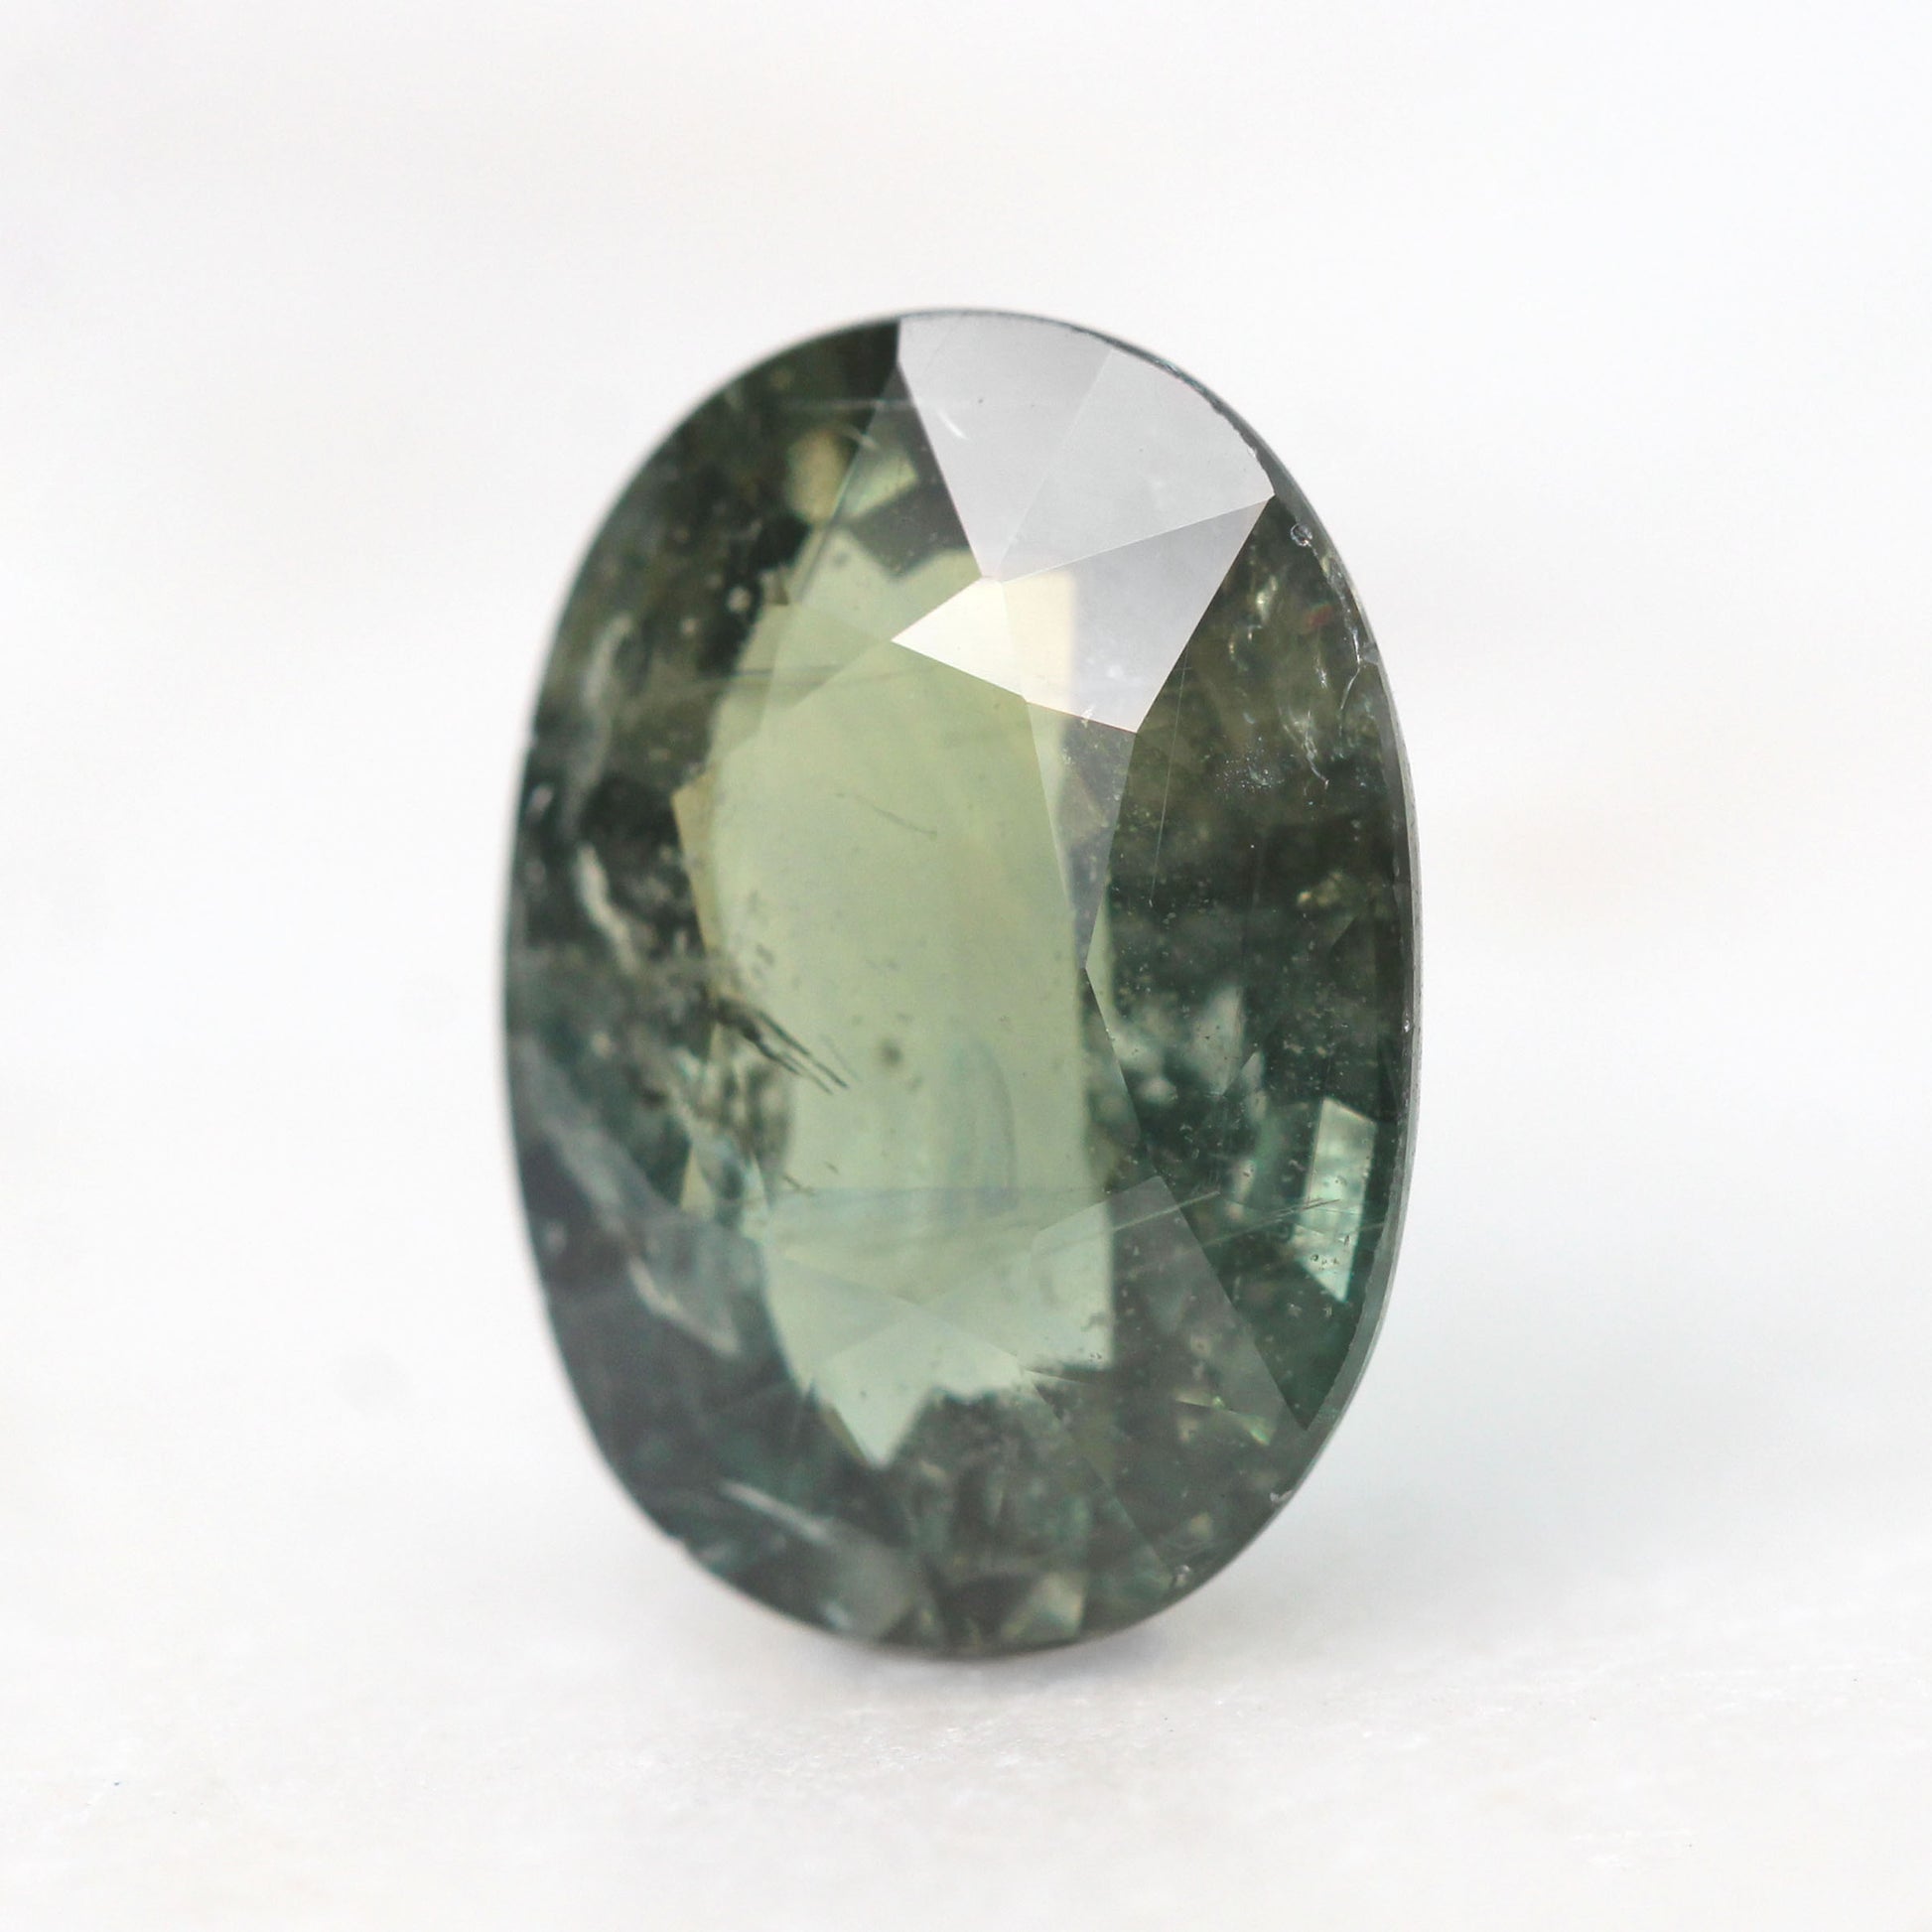 4.99 Carat Golden Green Oval Sapphire for Custom Work - Inventory Code YGO499 - Midwinter Co. Alternative Bridal Rings and Modern Fine Jewelry